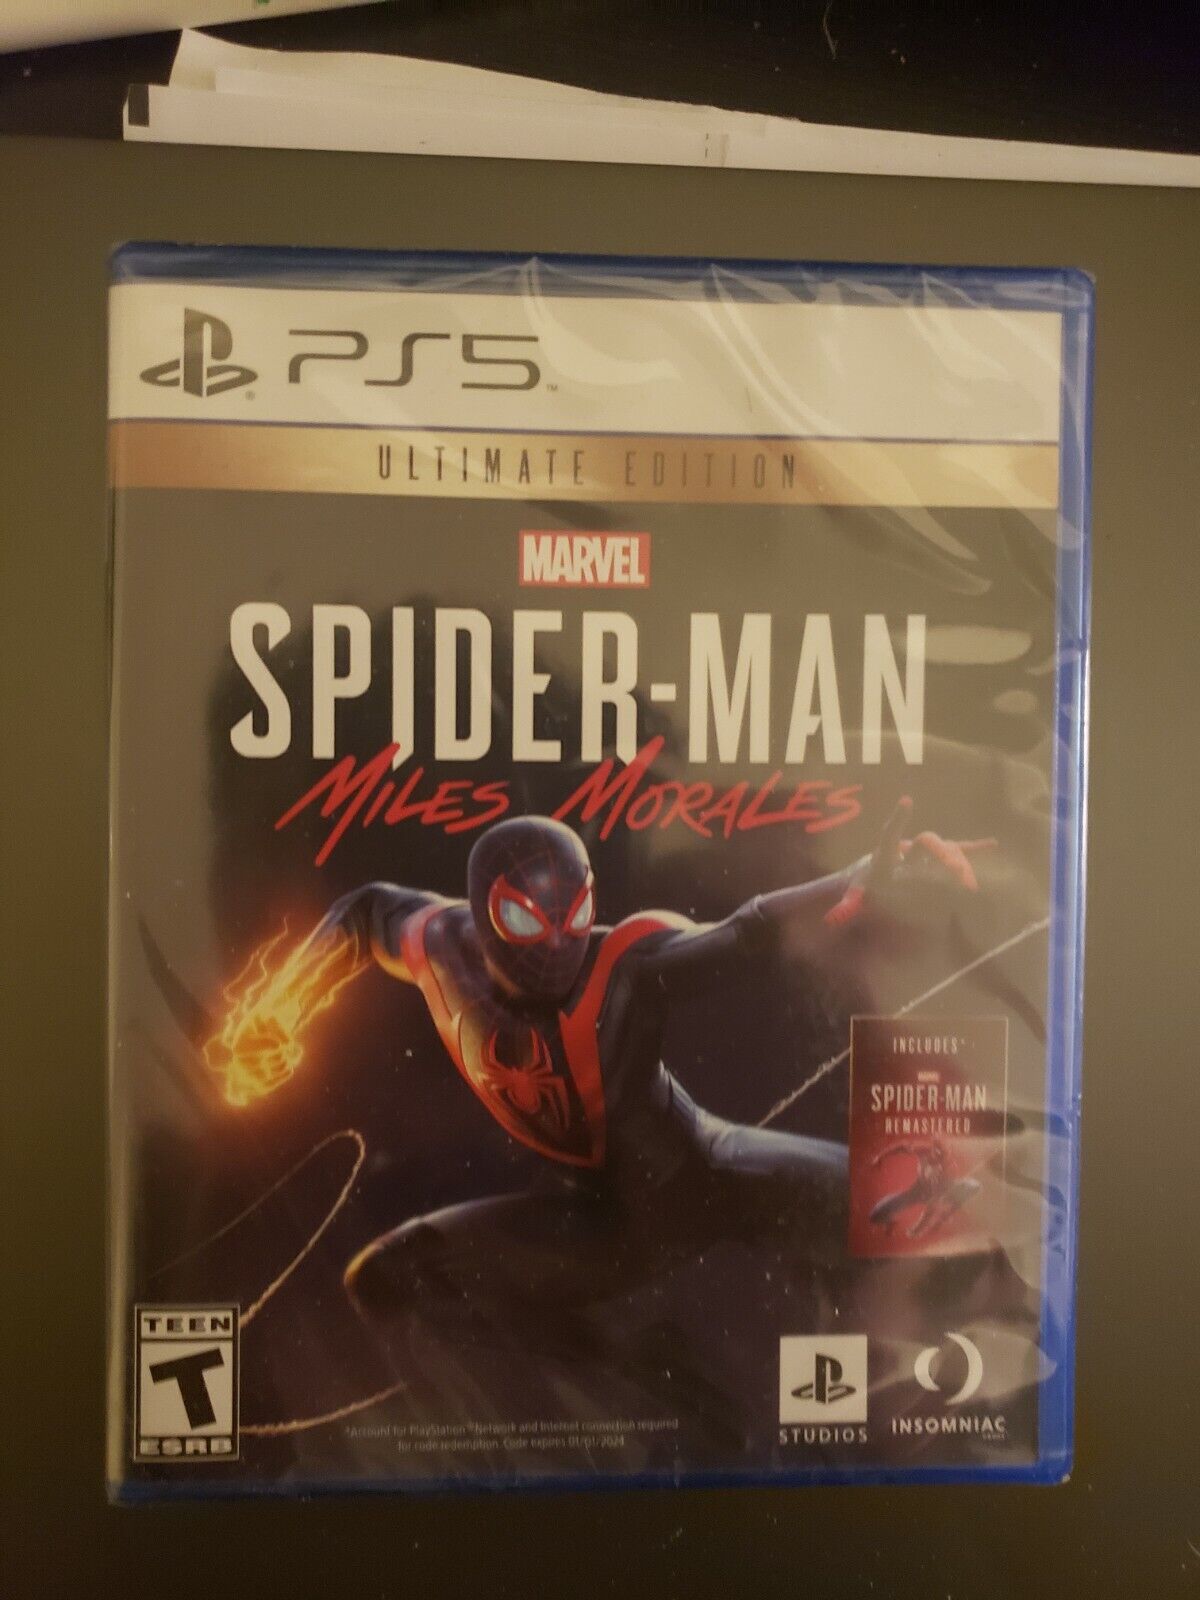 Marvel's Spider-Man: Miles Morales Ultimate Edition -PlayStation 5 - Sony SEALED